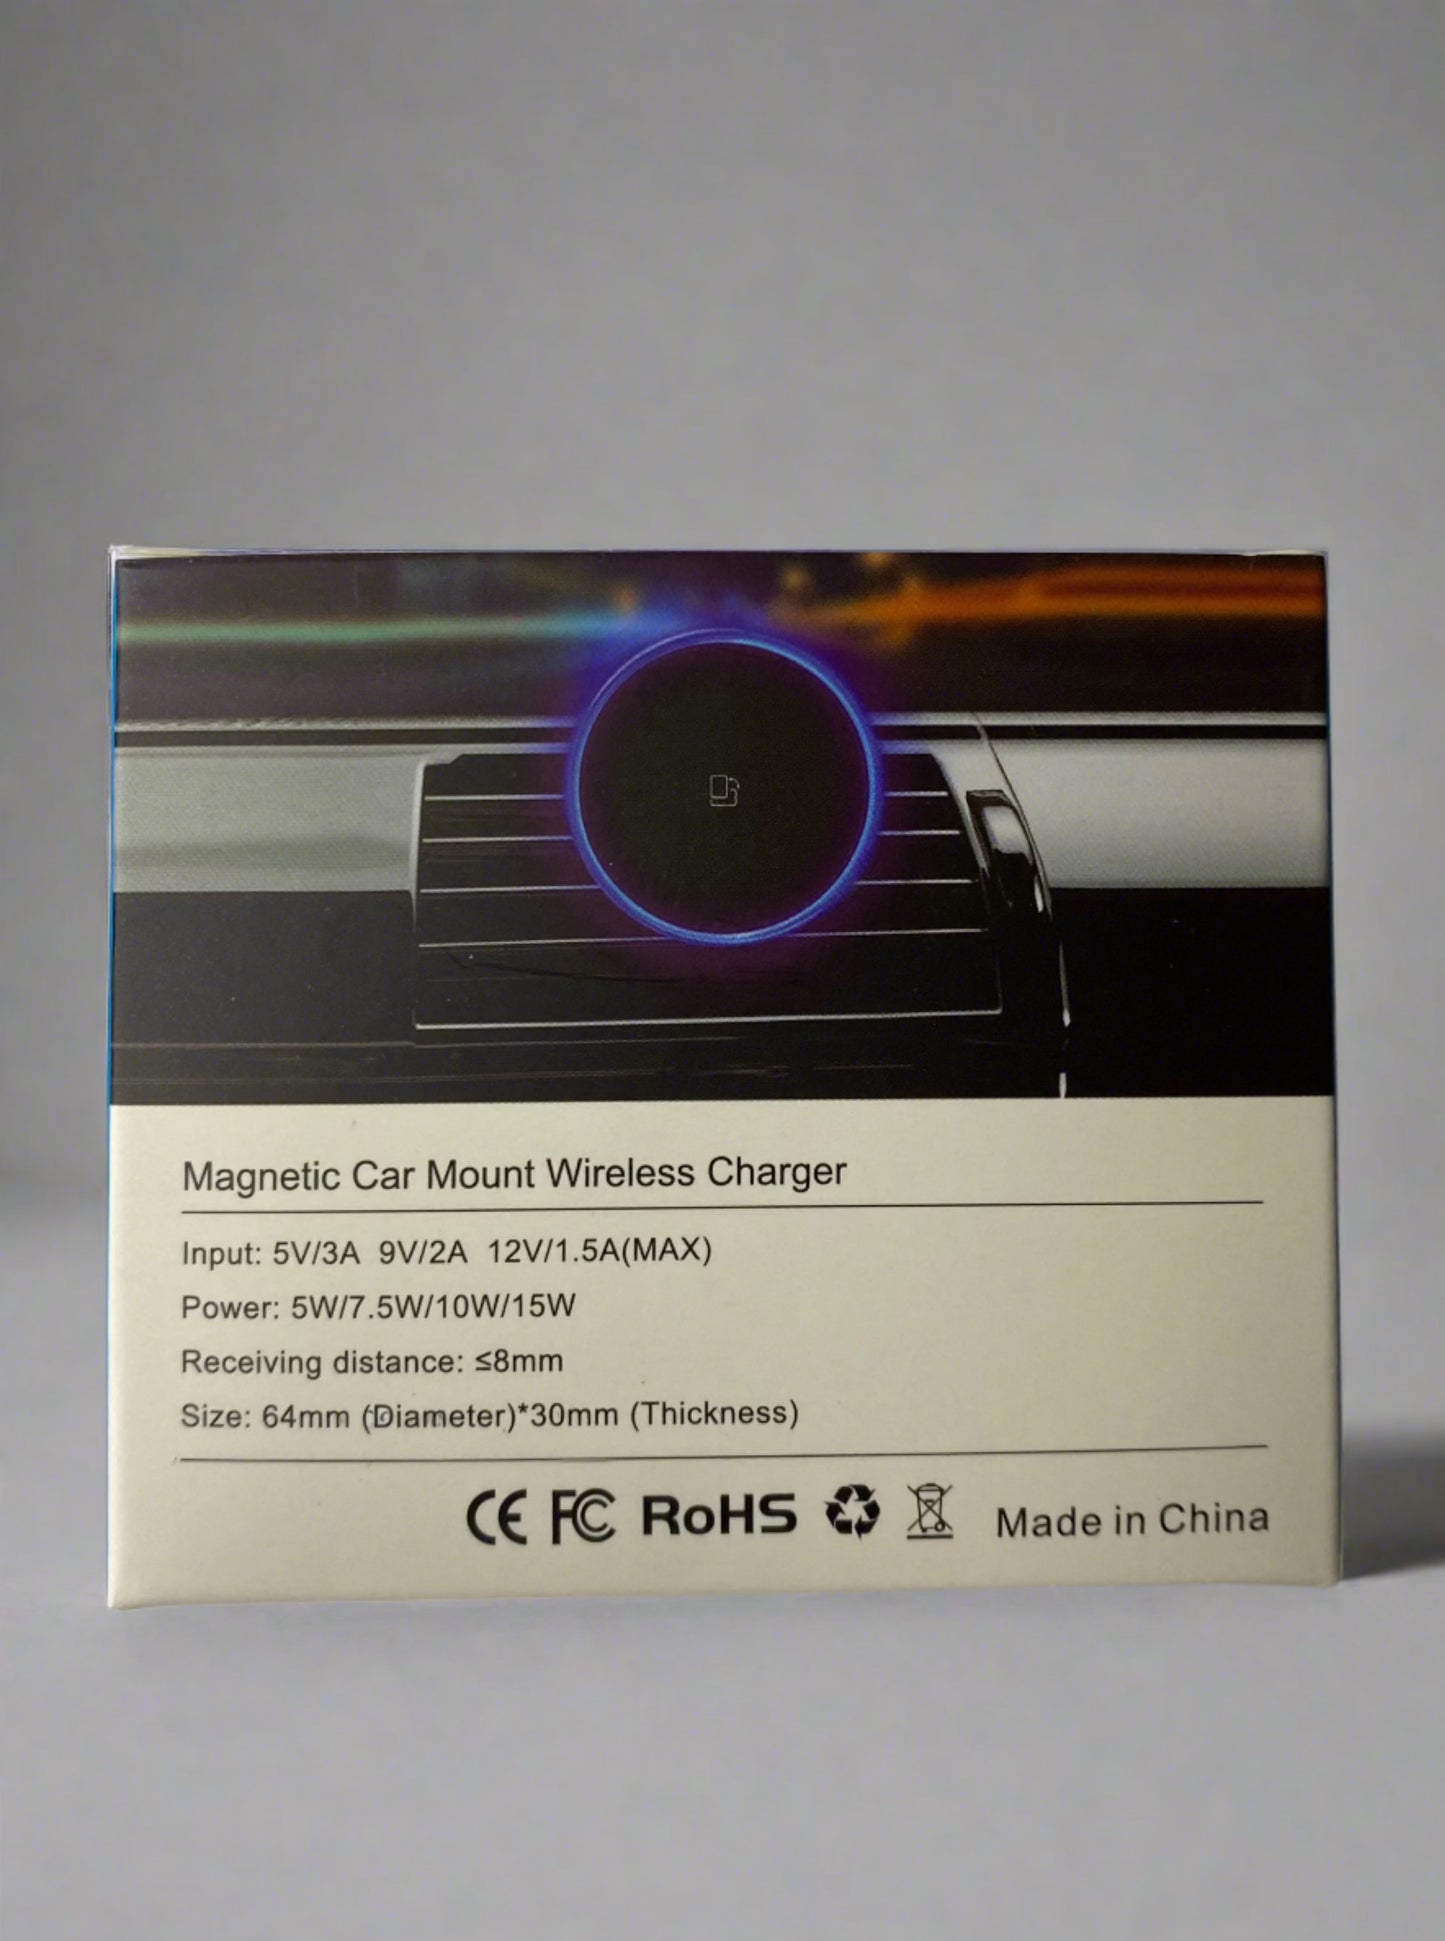 Magnatic Car Mount Wireless Charger